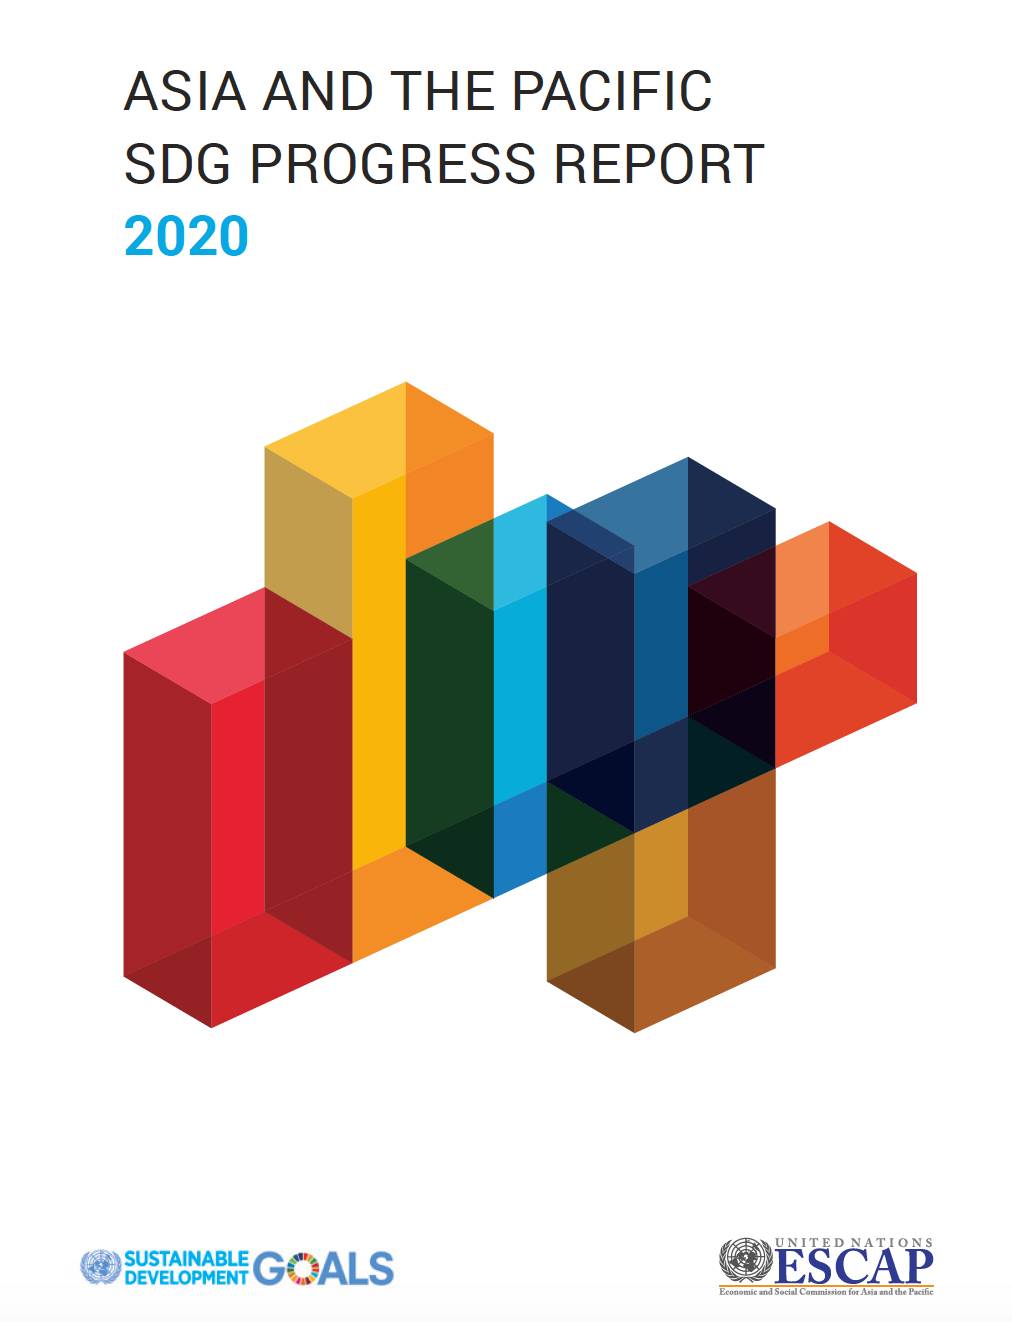 Asia and the Pacific SDG Progress Report 2020